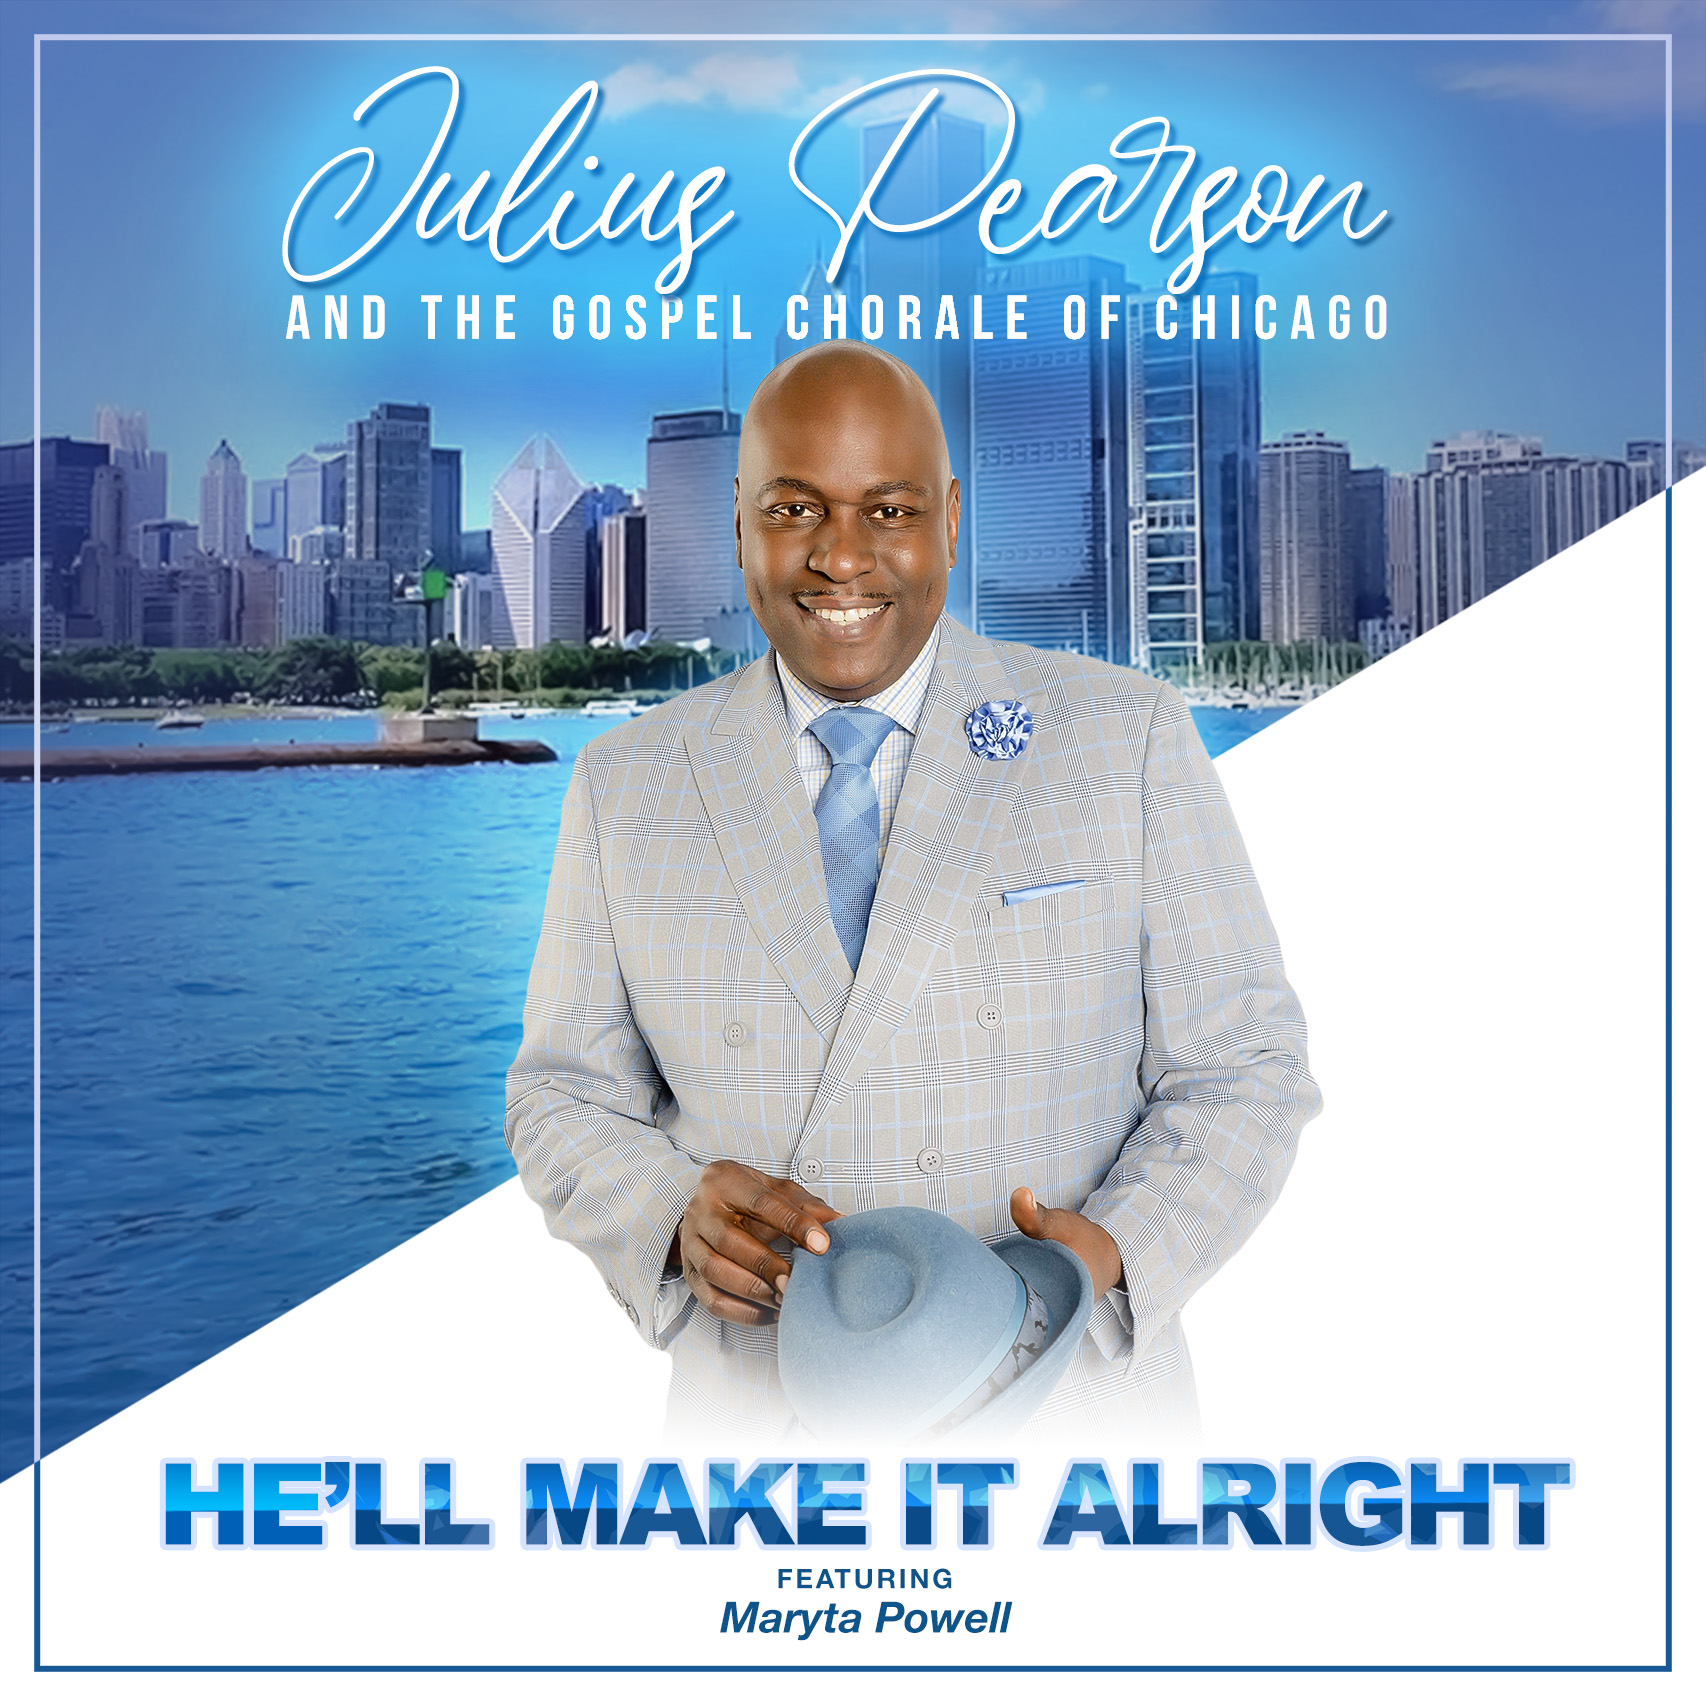 Julius Pearson and the Gospel Chorale of Chicago art work - He'll Make It Alright 